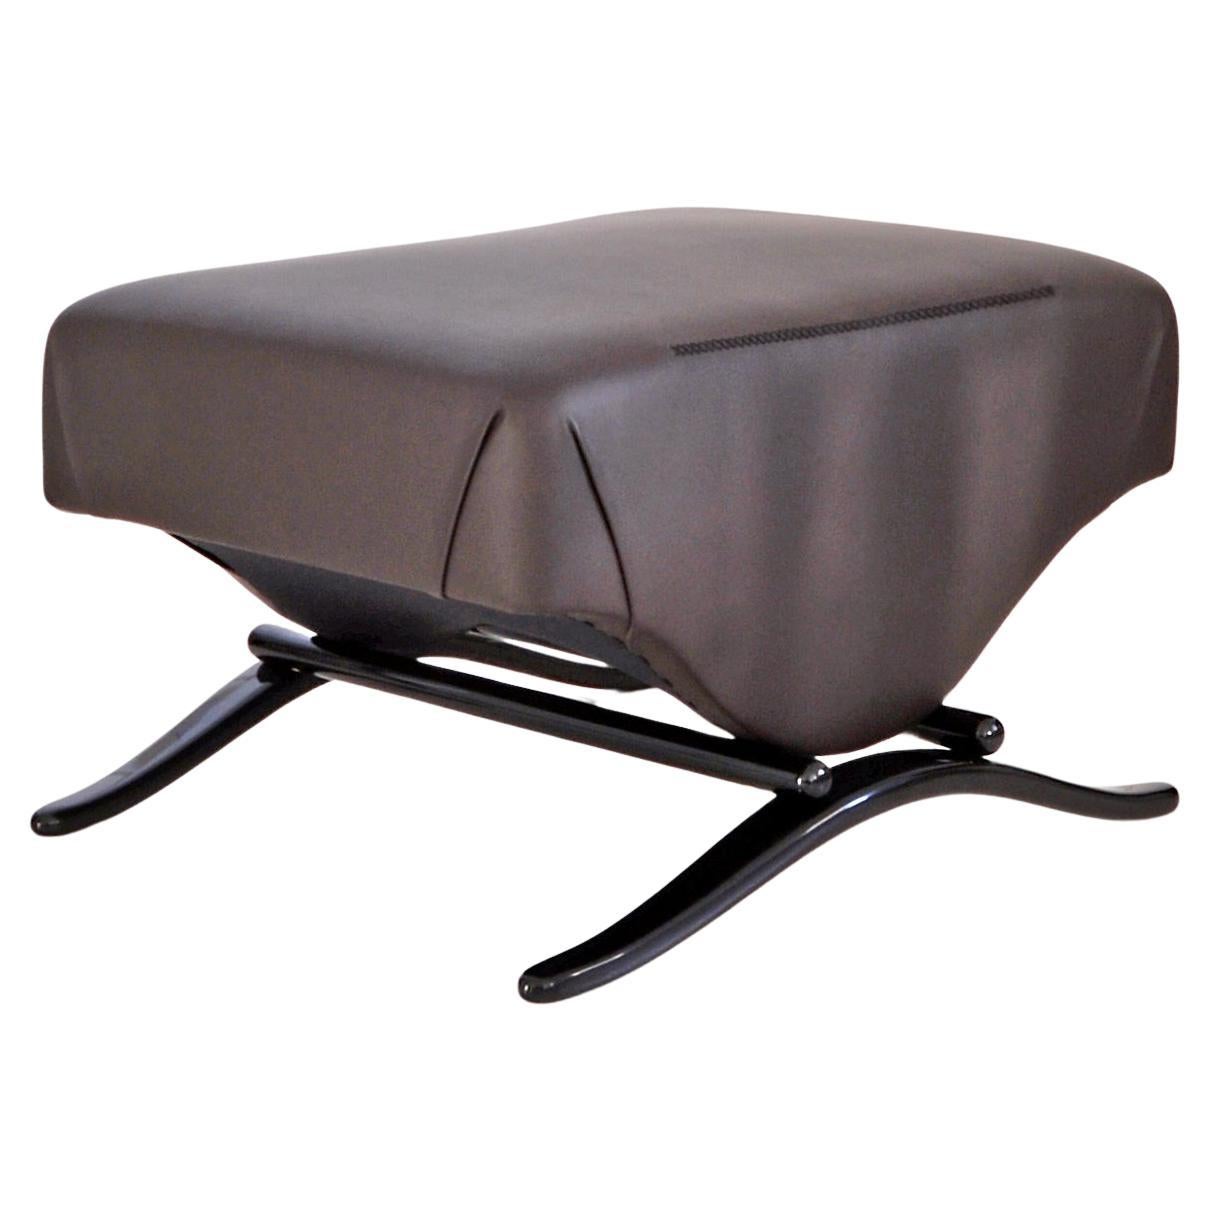 Customizable Stool/ Ottoman, Bent Wood, Leather Upholstery, Glossy Lacquer